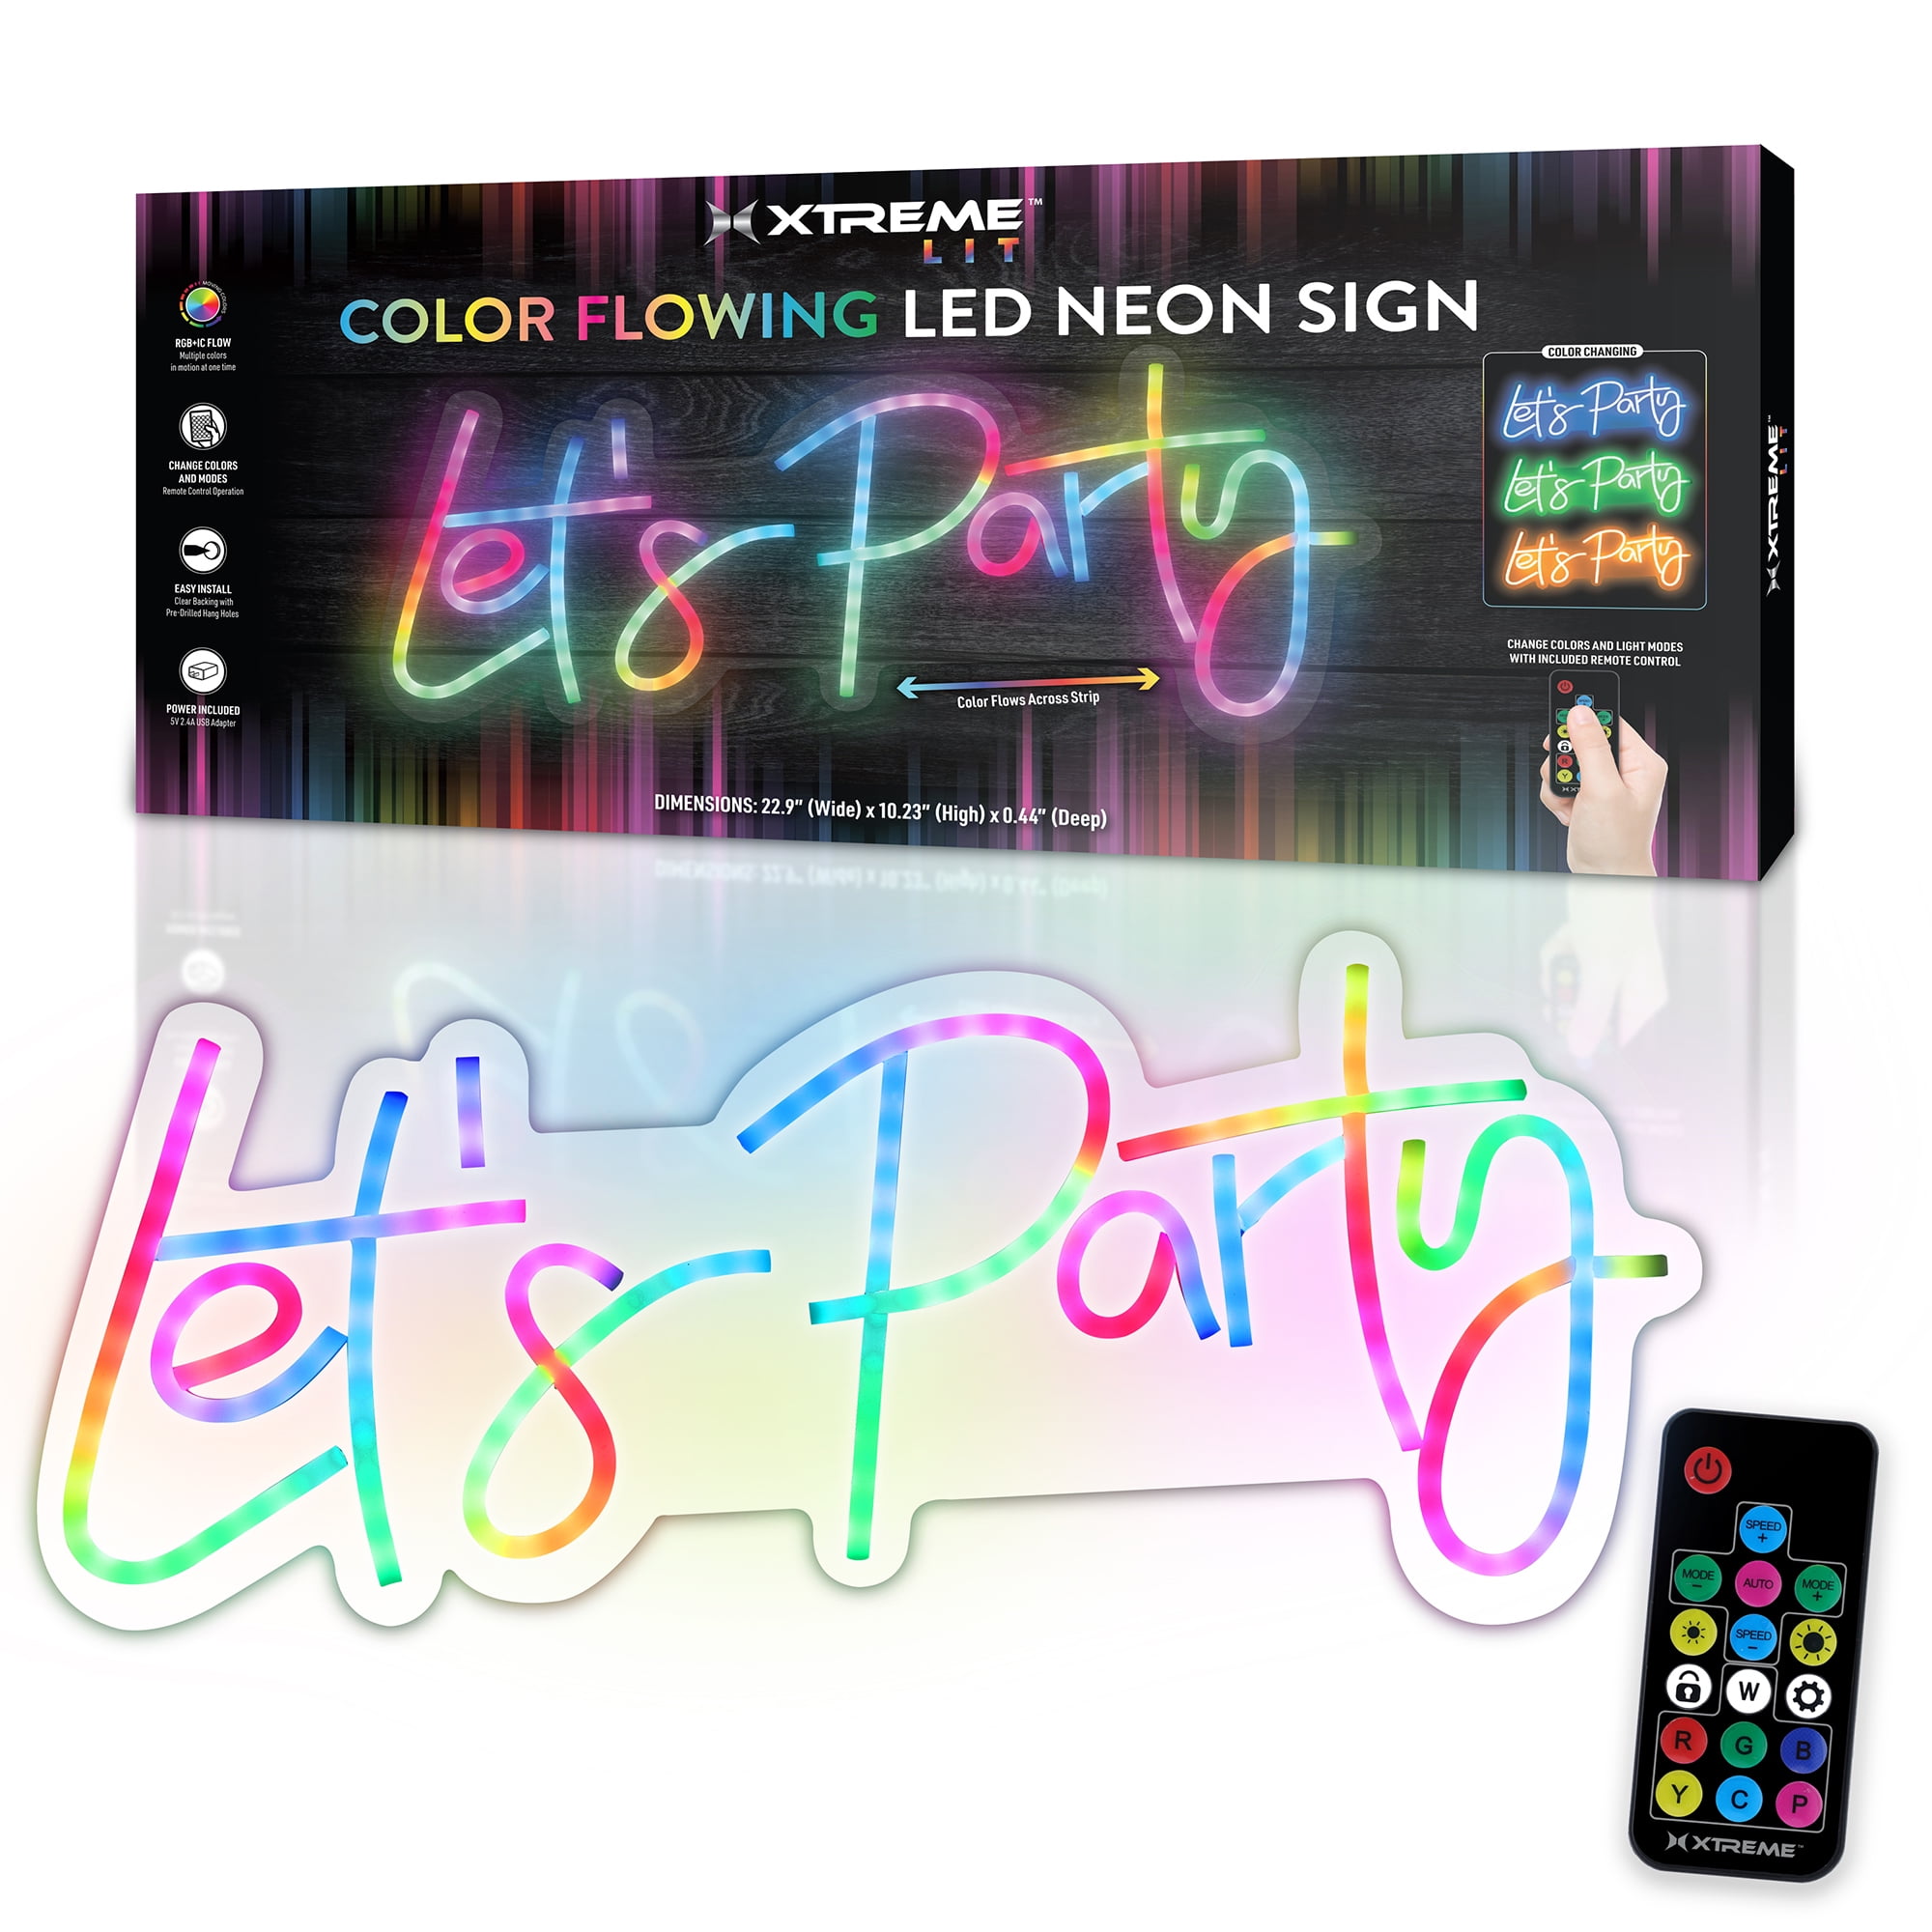 Xtreme Lit 'Let's Party' Multi-Color LED Neon Sign with RGBIC, Hanging Wall Art, Remote Control